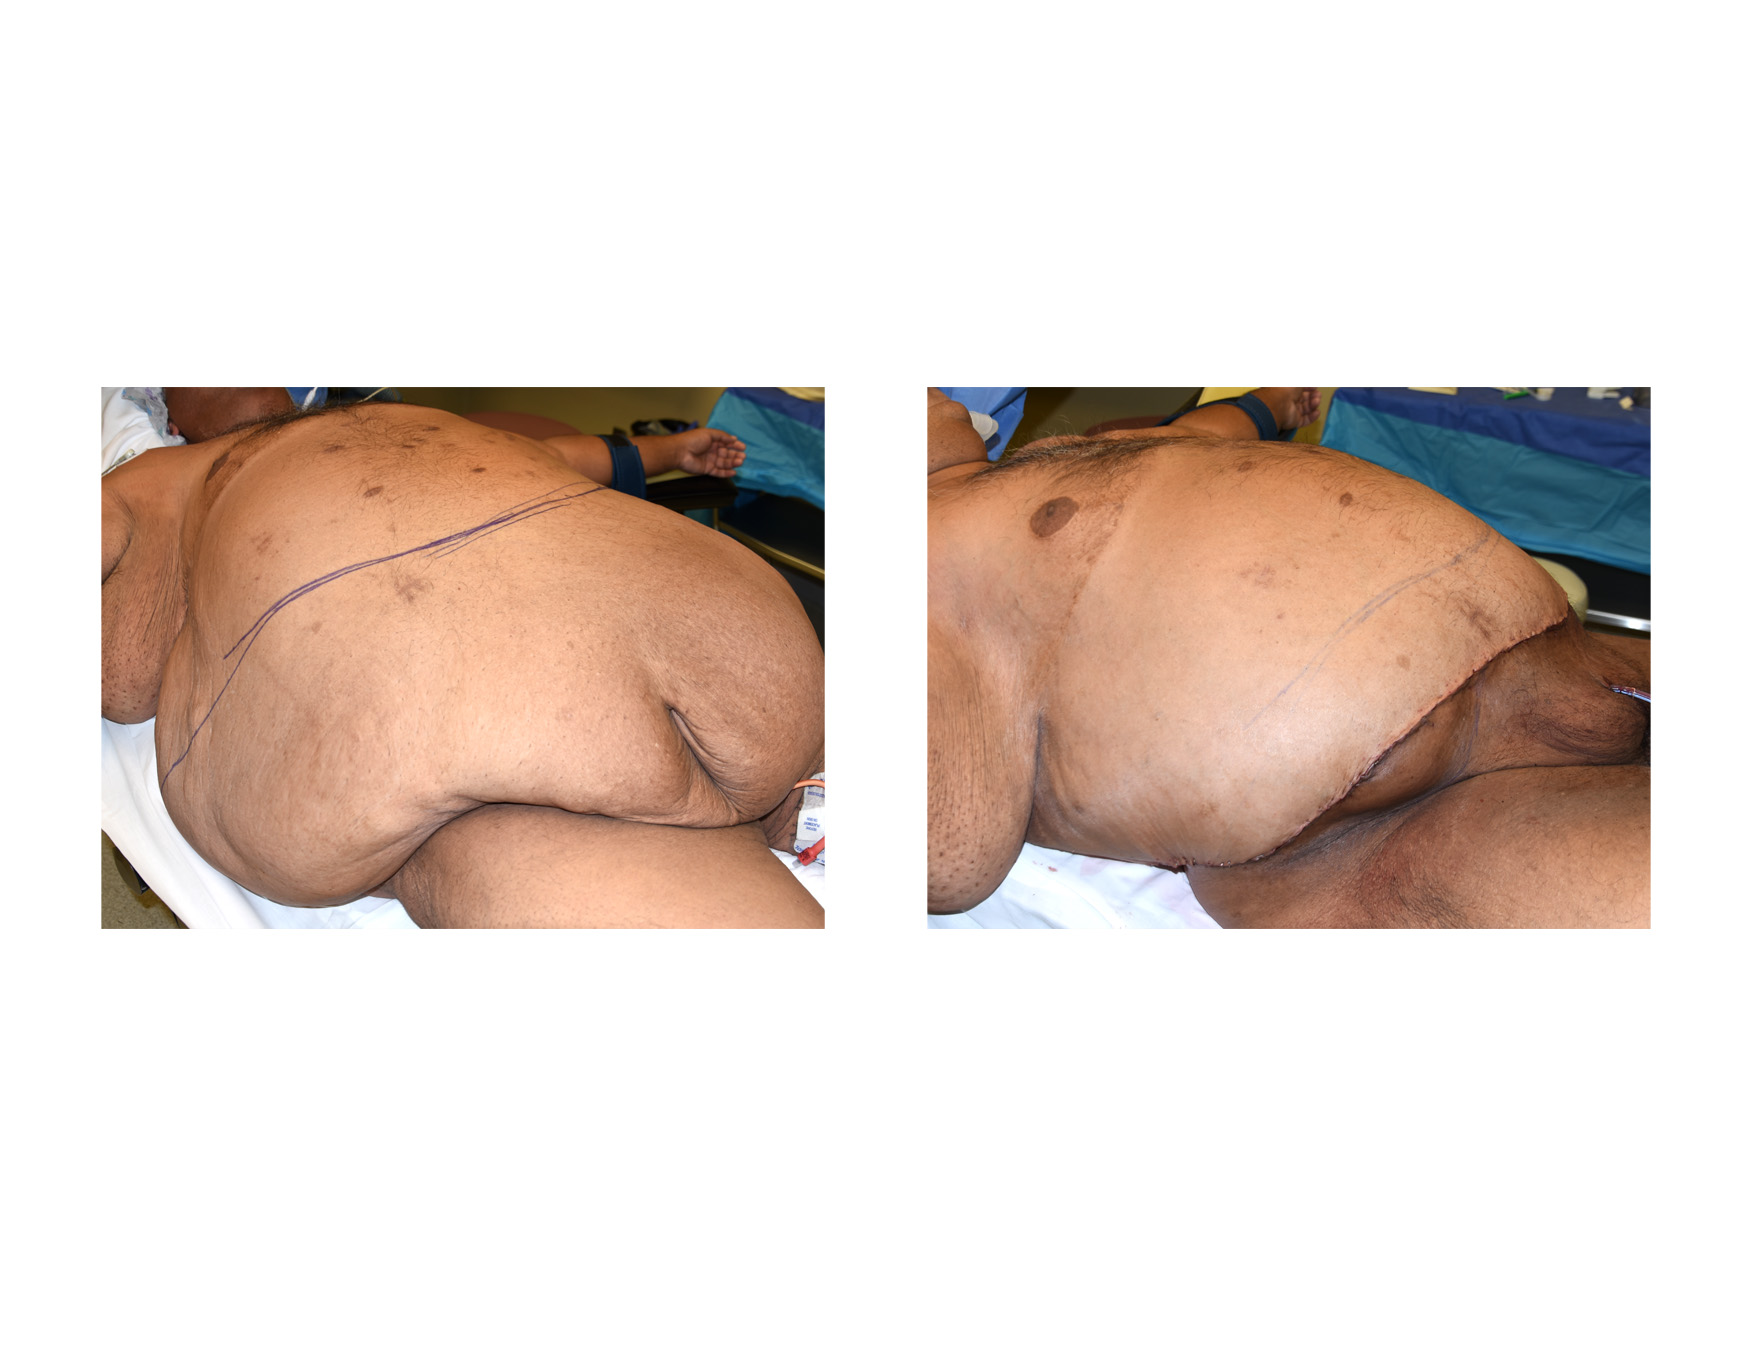 https://exploreplasticsurgery.com/wp-content/uploads/2016/05/Large-Abdominal-Panniculectomy-result-intraop-right-oblique-view-Dr-Barry-Eppley-Indianapolis.jpg